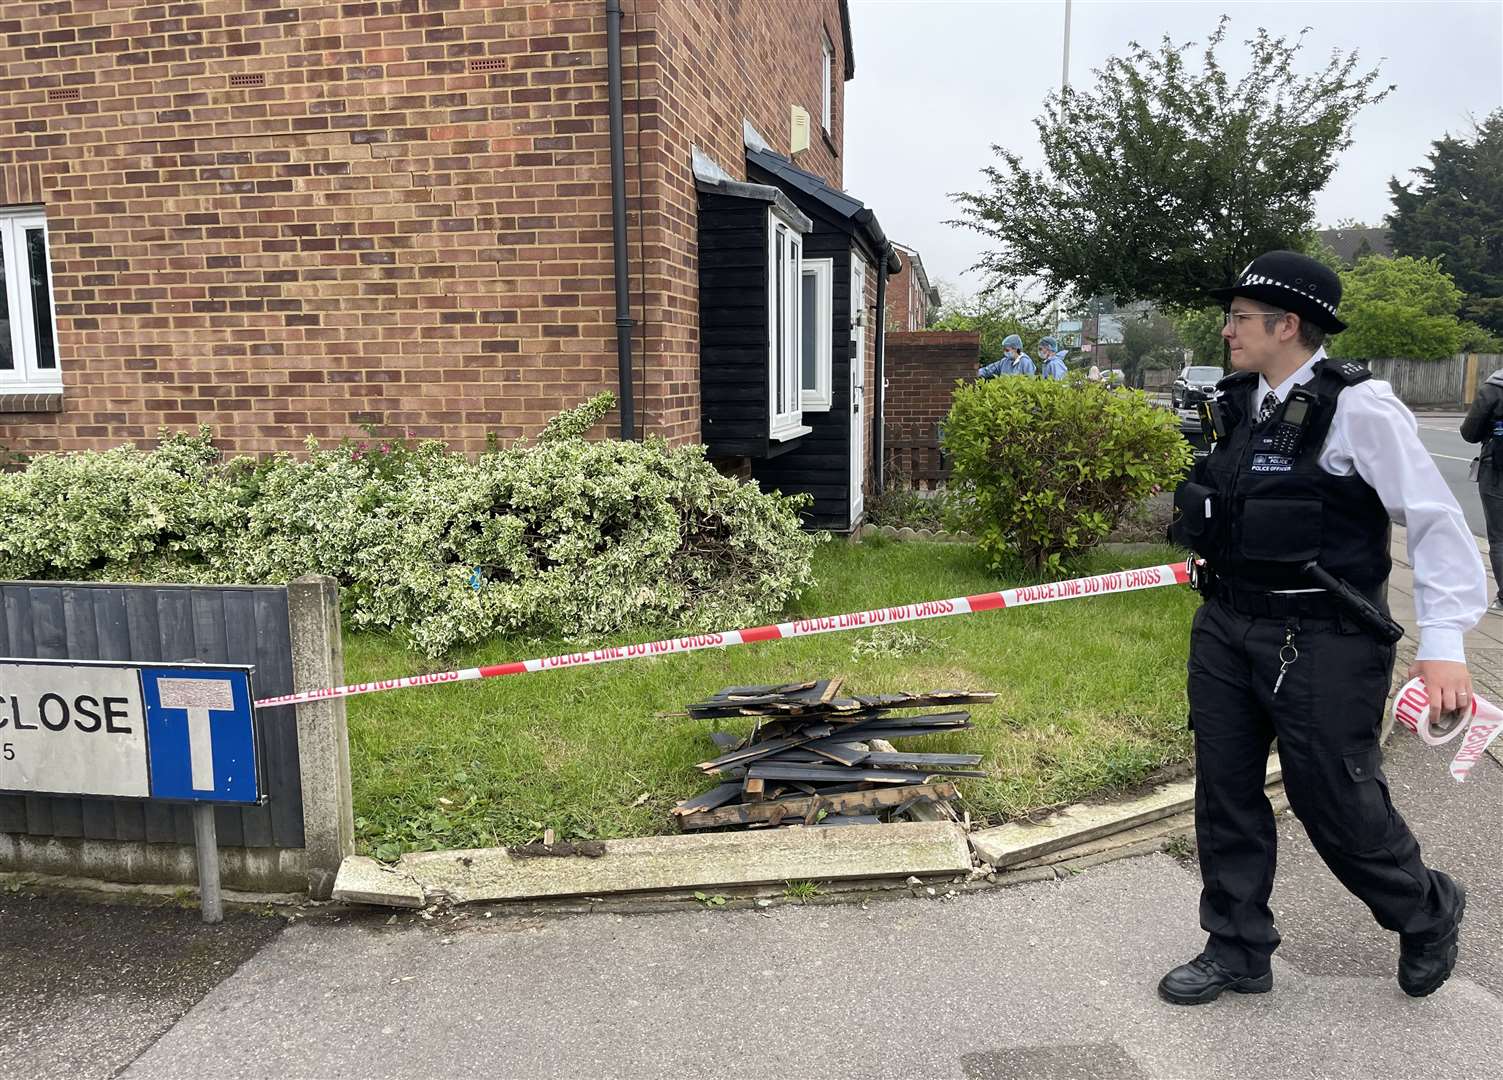 Damage to a property on Laing Close near the scene in Hainault (Samuel Montgomery/PA)